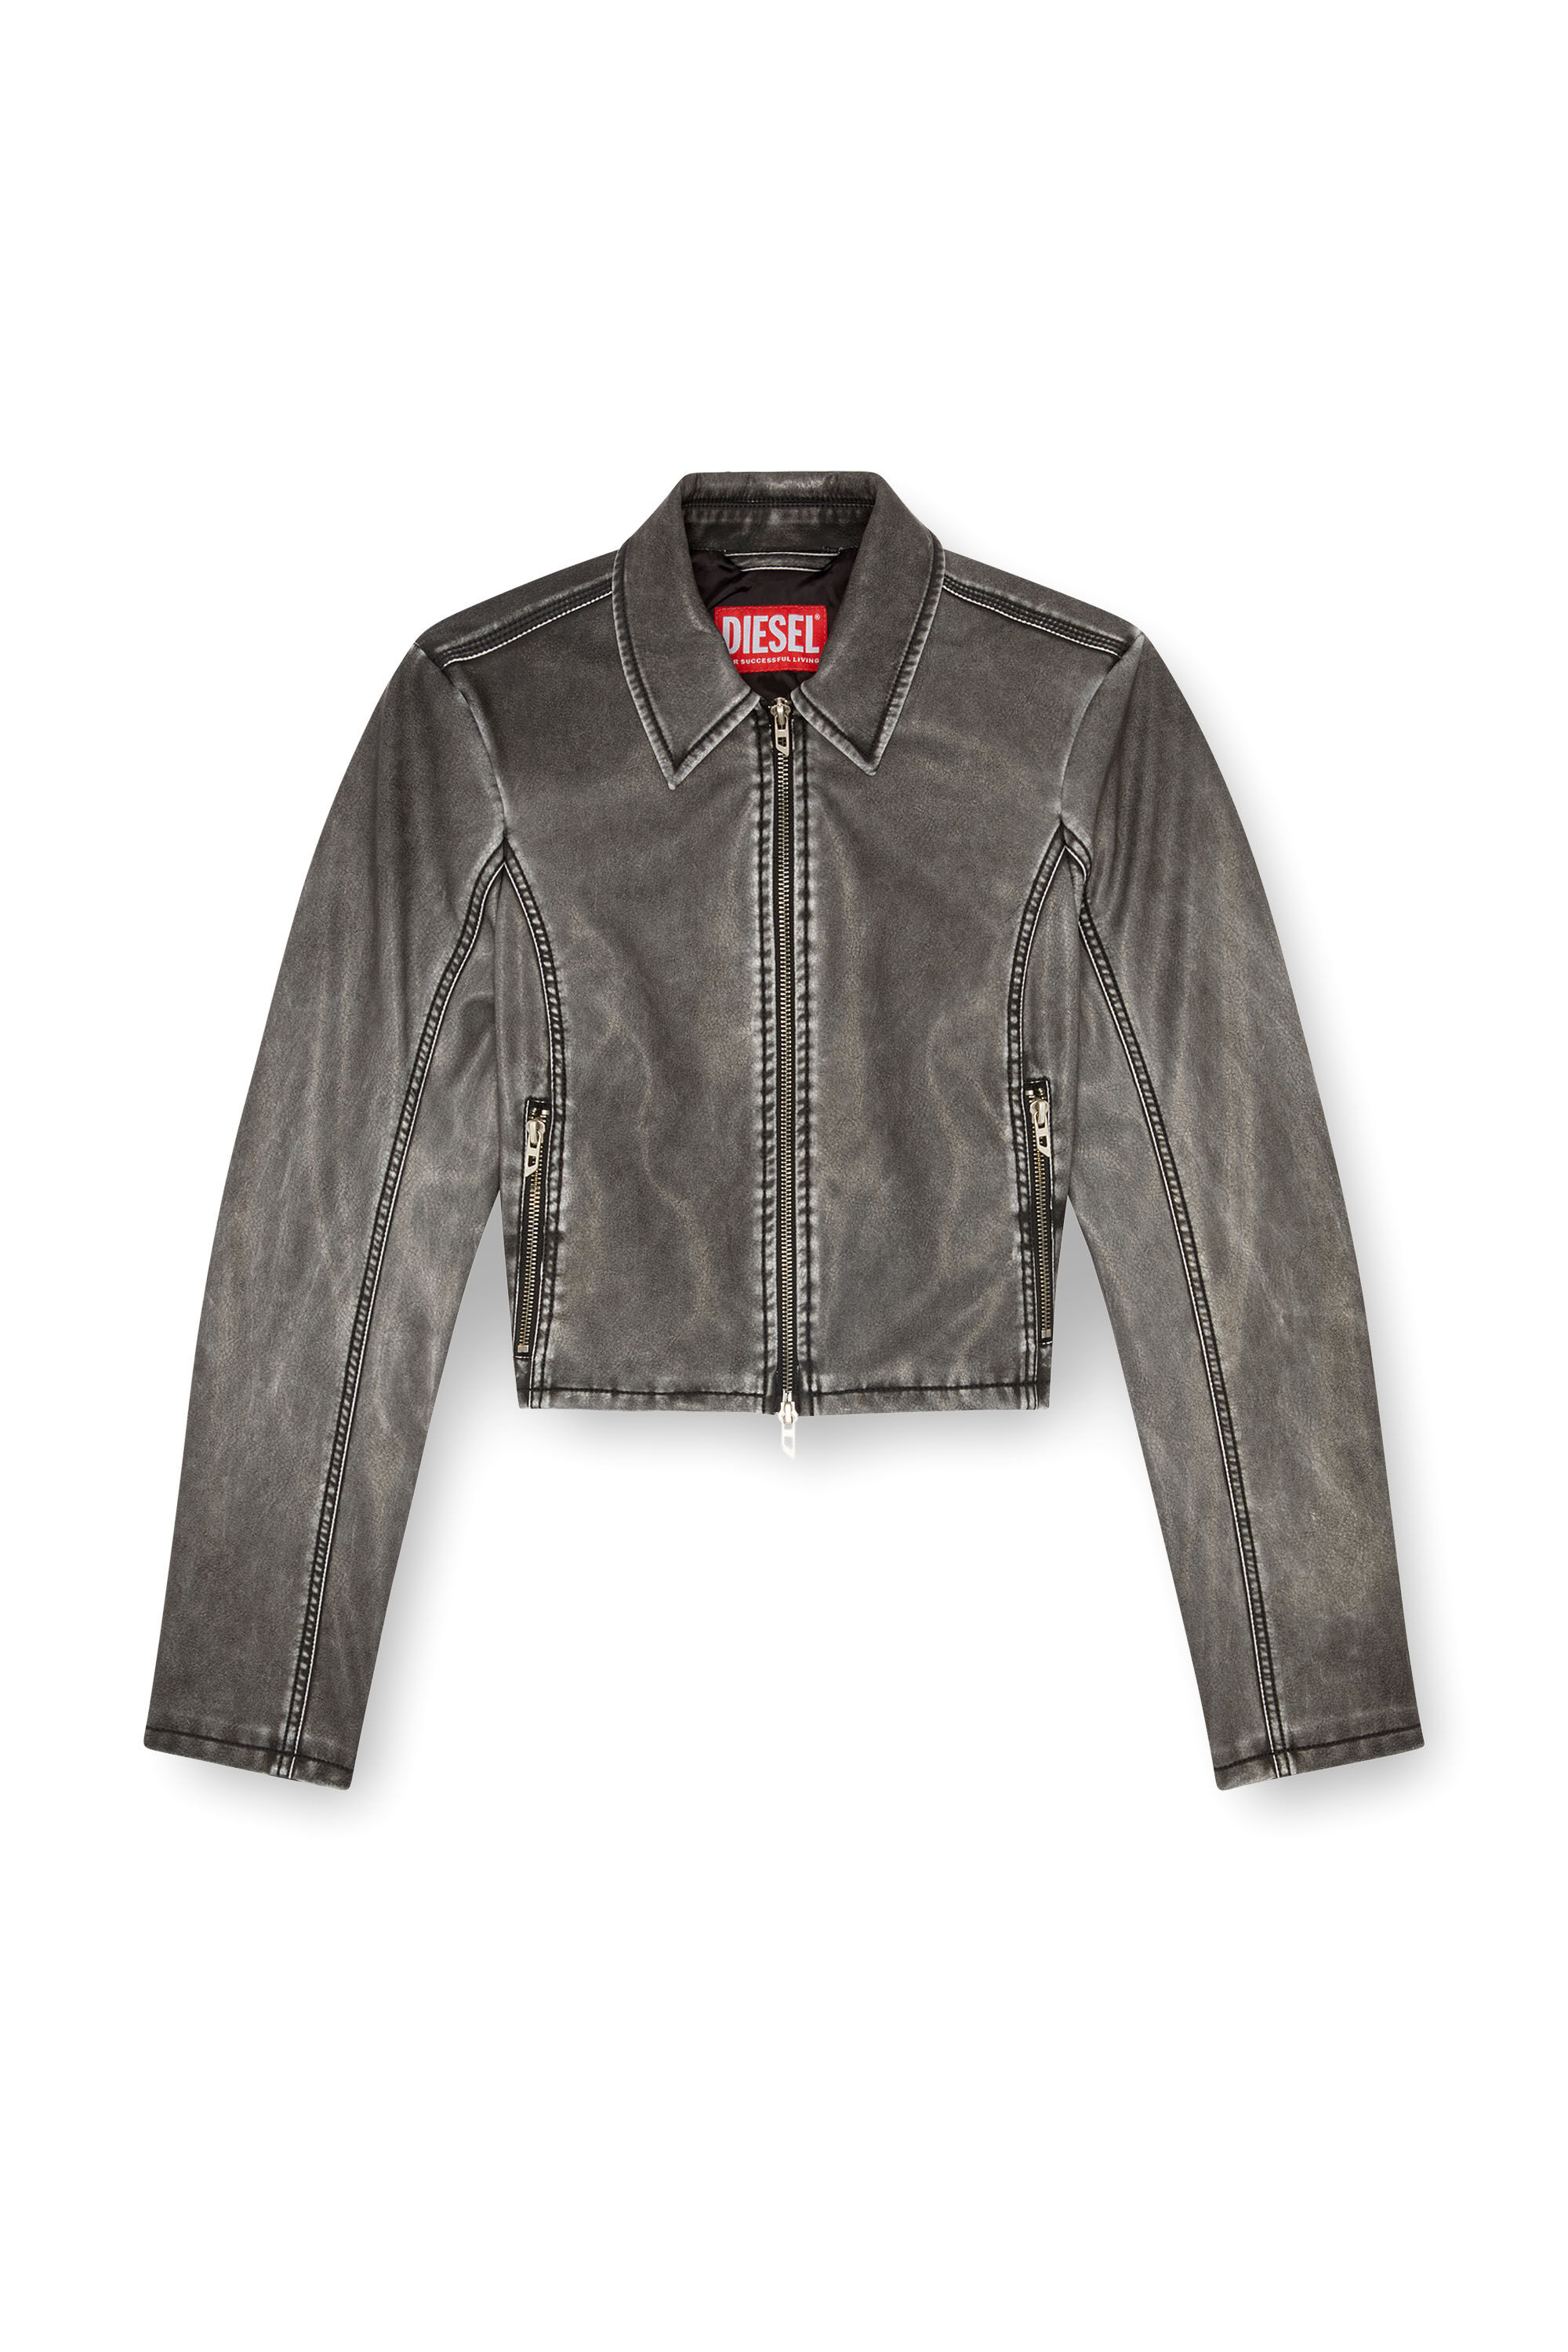 Diesel - G-OTA, Woman Cropped jacket in washed tech fabric in Black - Image 2